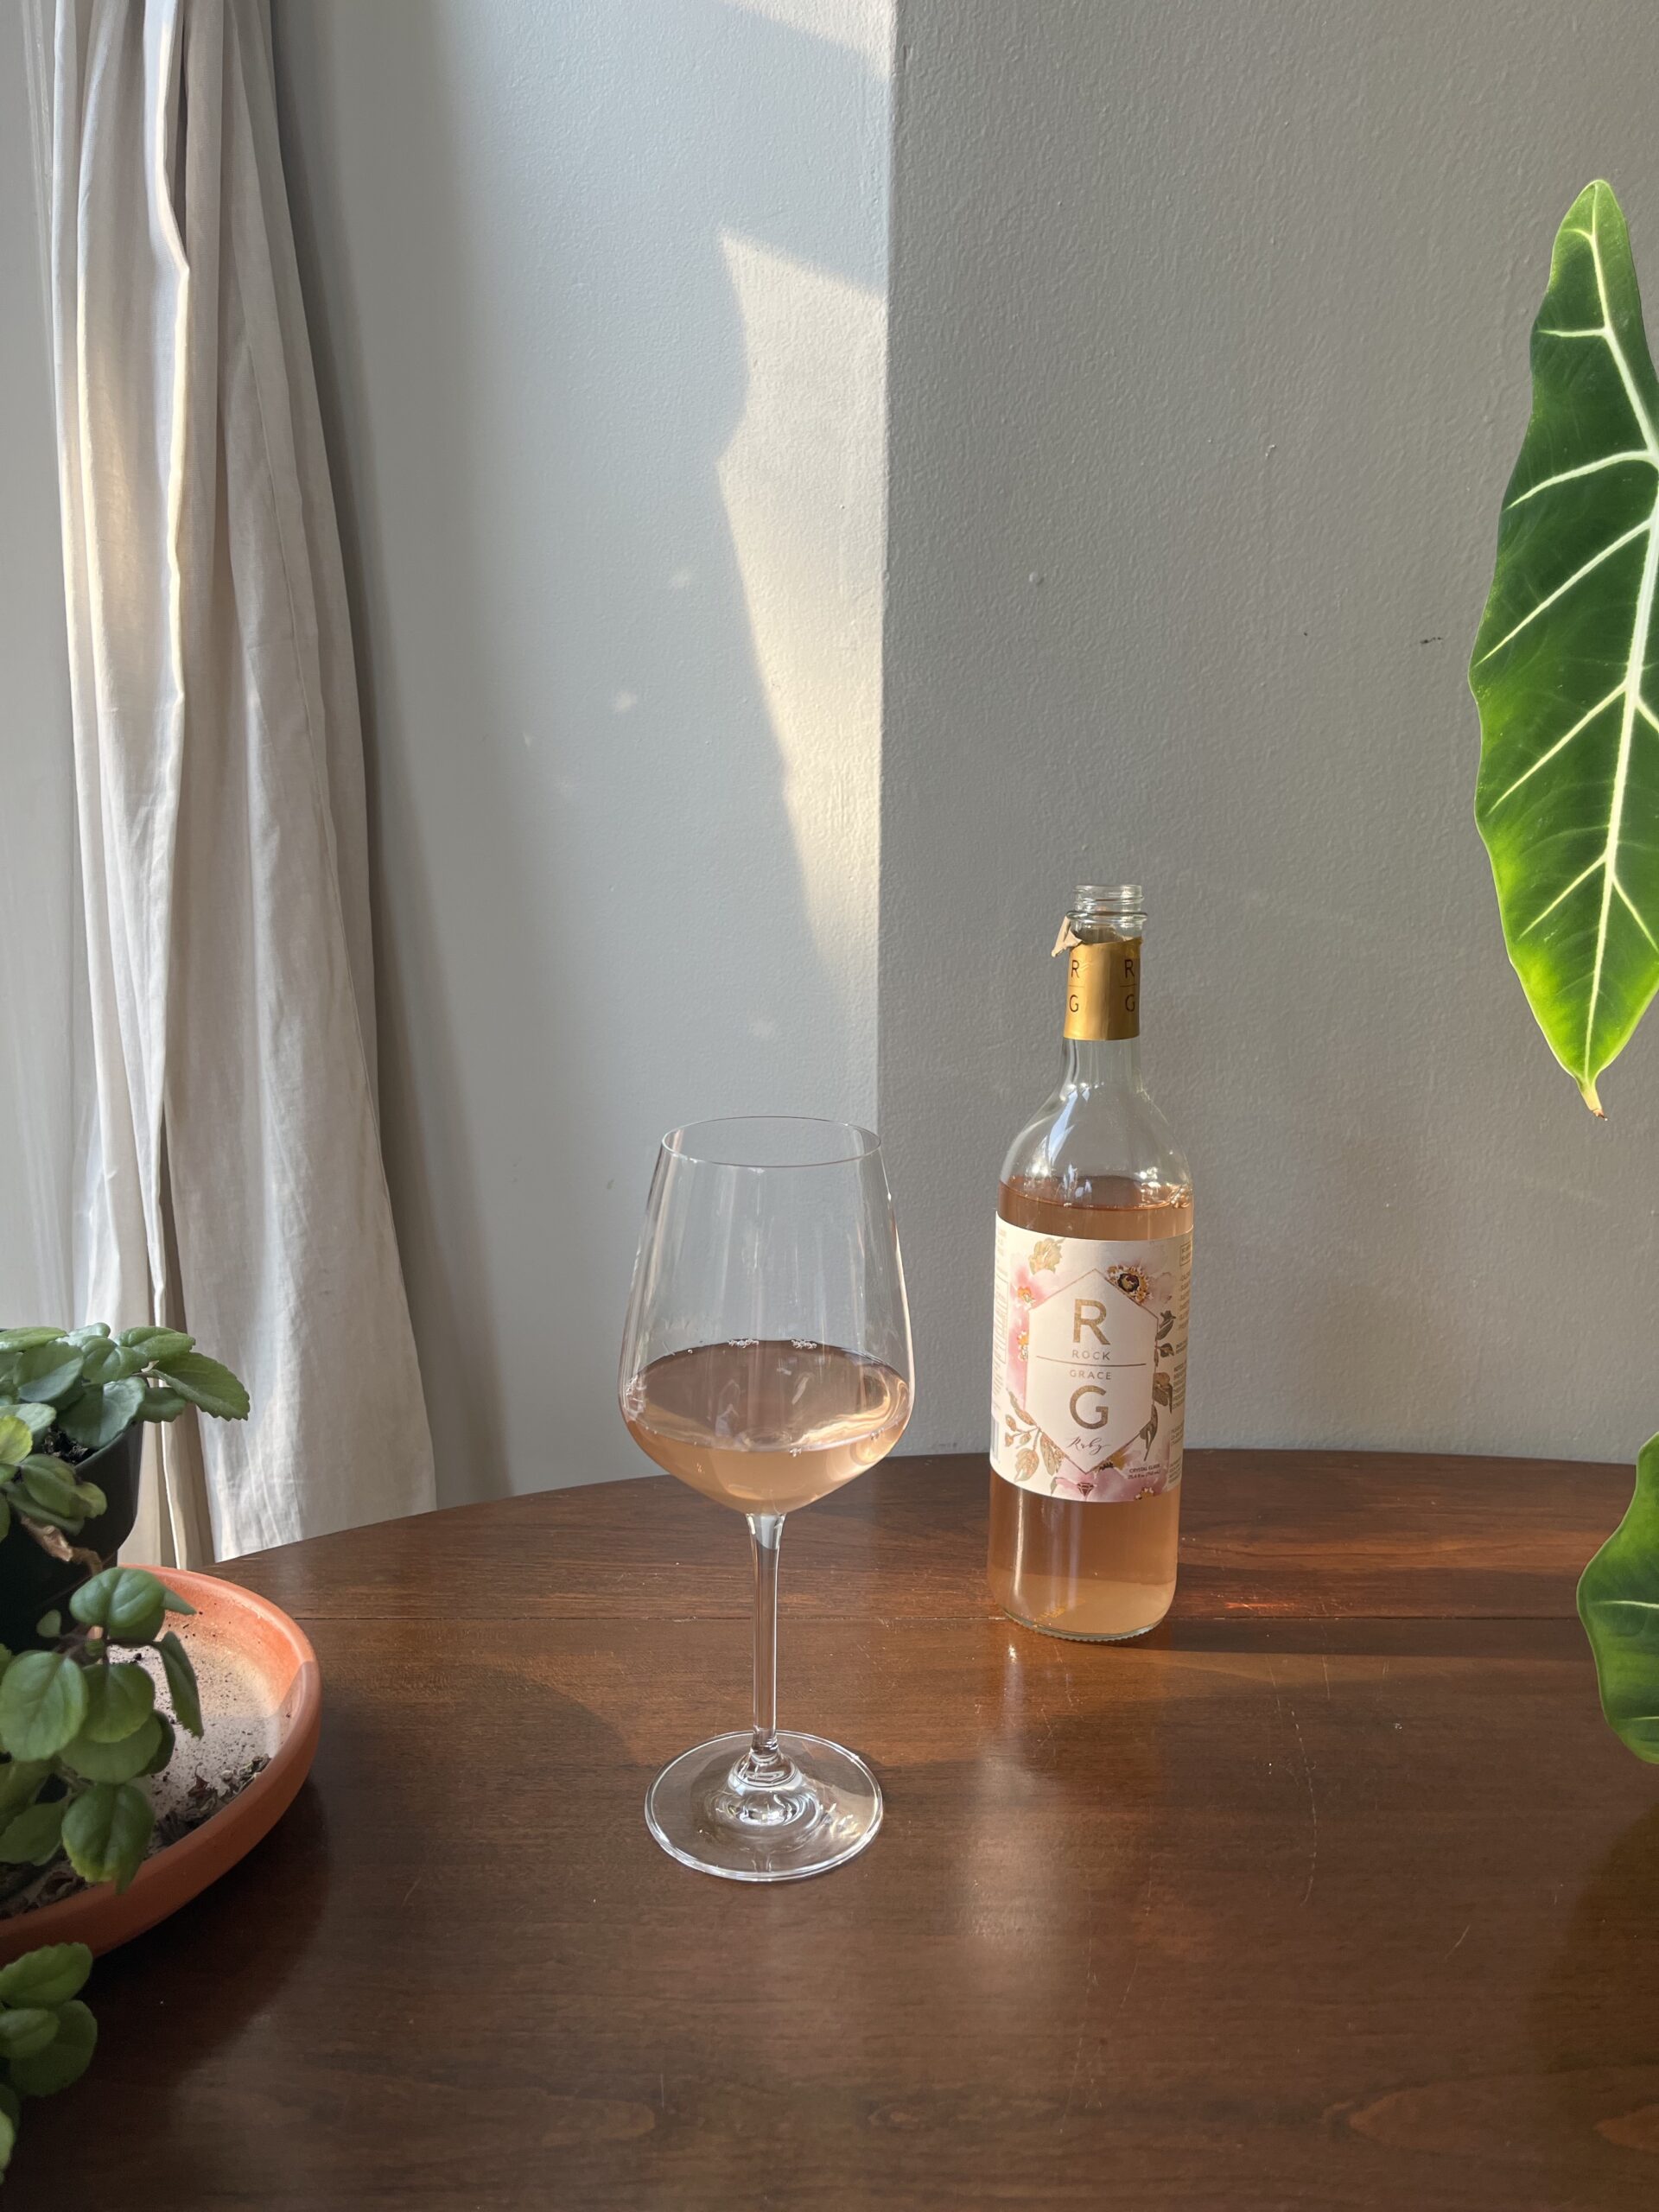 A wine glass filled with a light pink wine sits next to a bottle labeled "RG" on a wooden table. A potted plant and a large leaf are partially visible on the table. Sunlight streams in from the left.